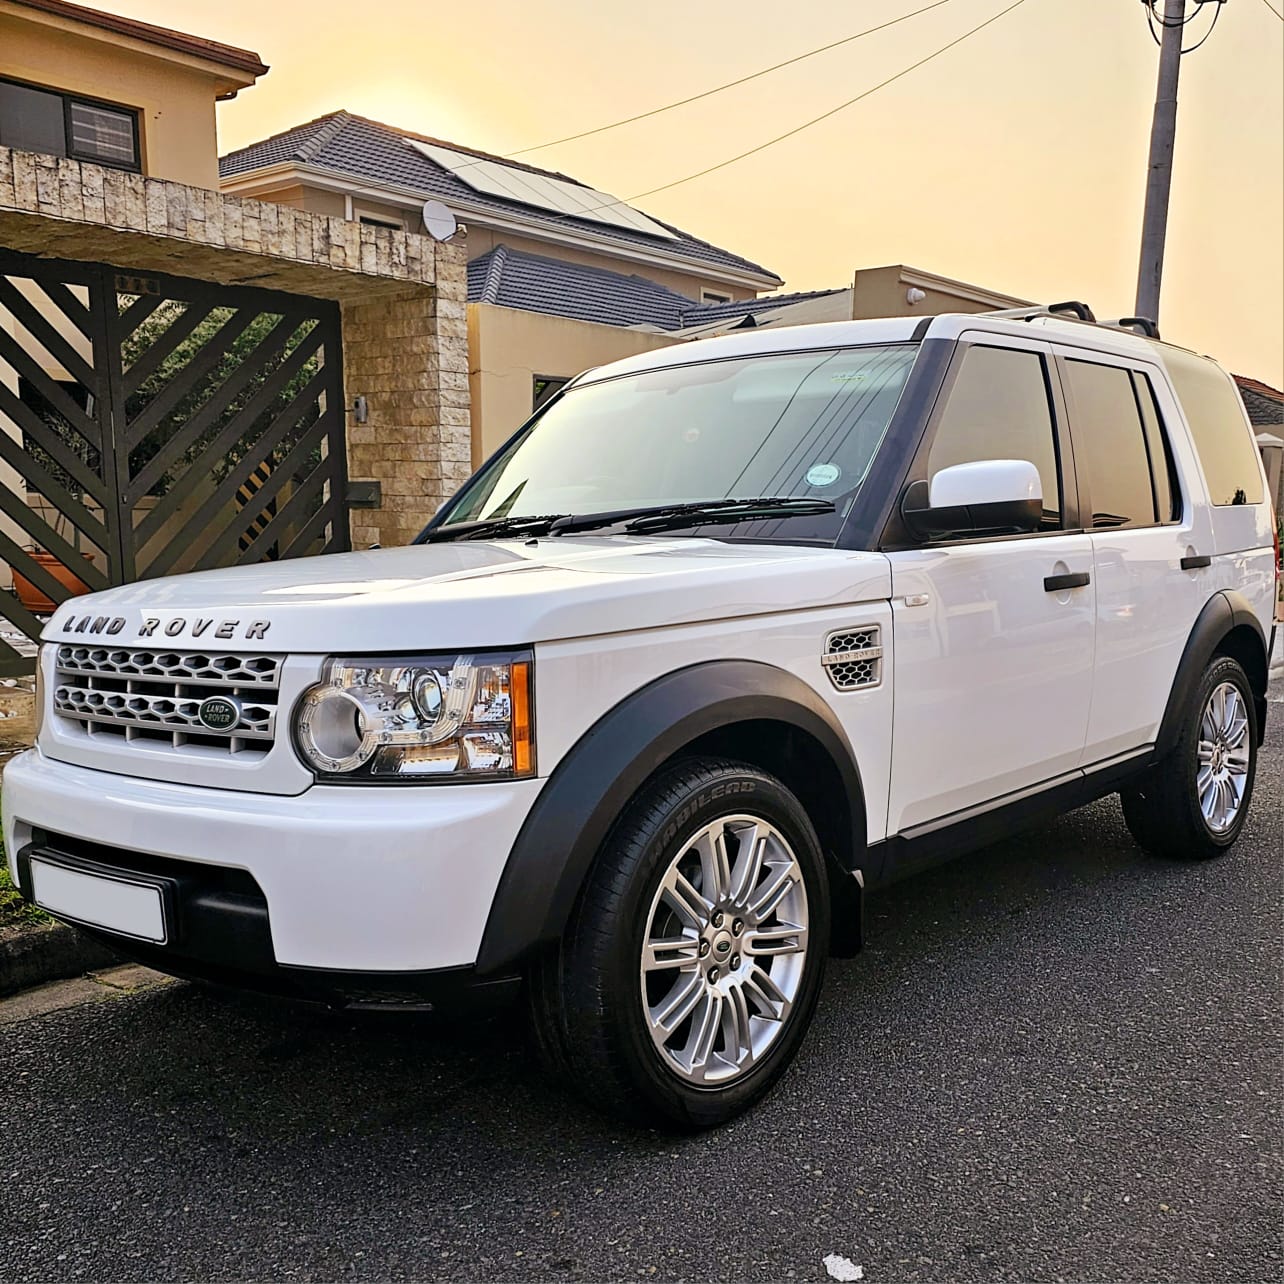 2014 Discovery 4 TDV6 S